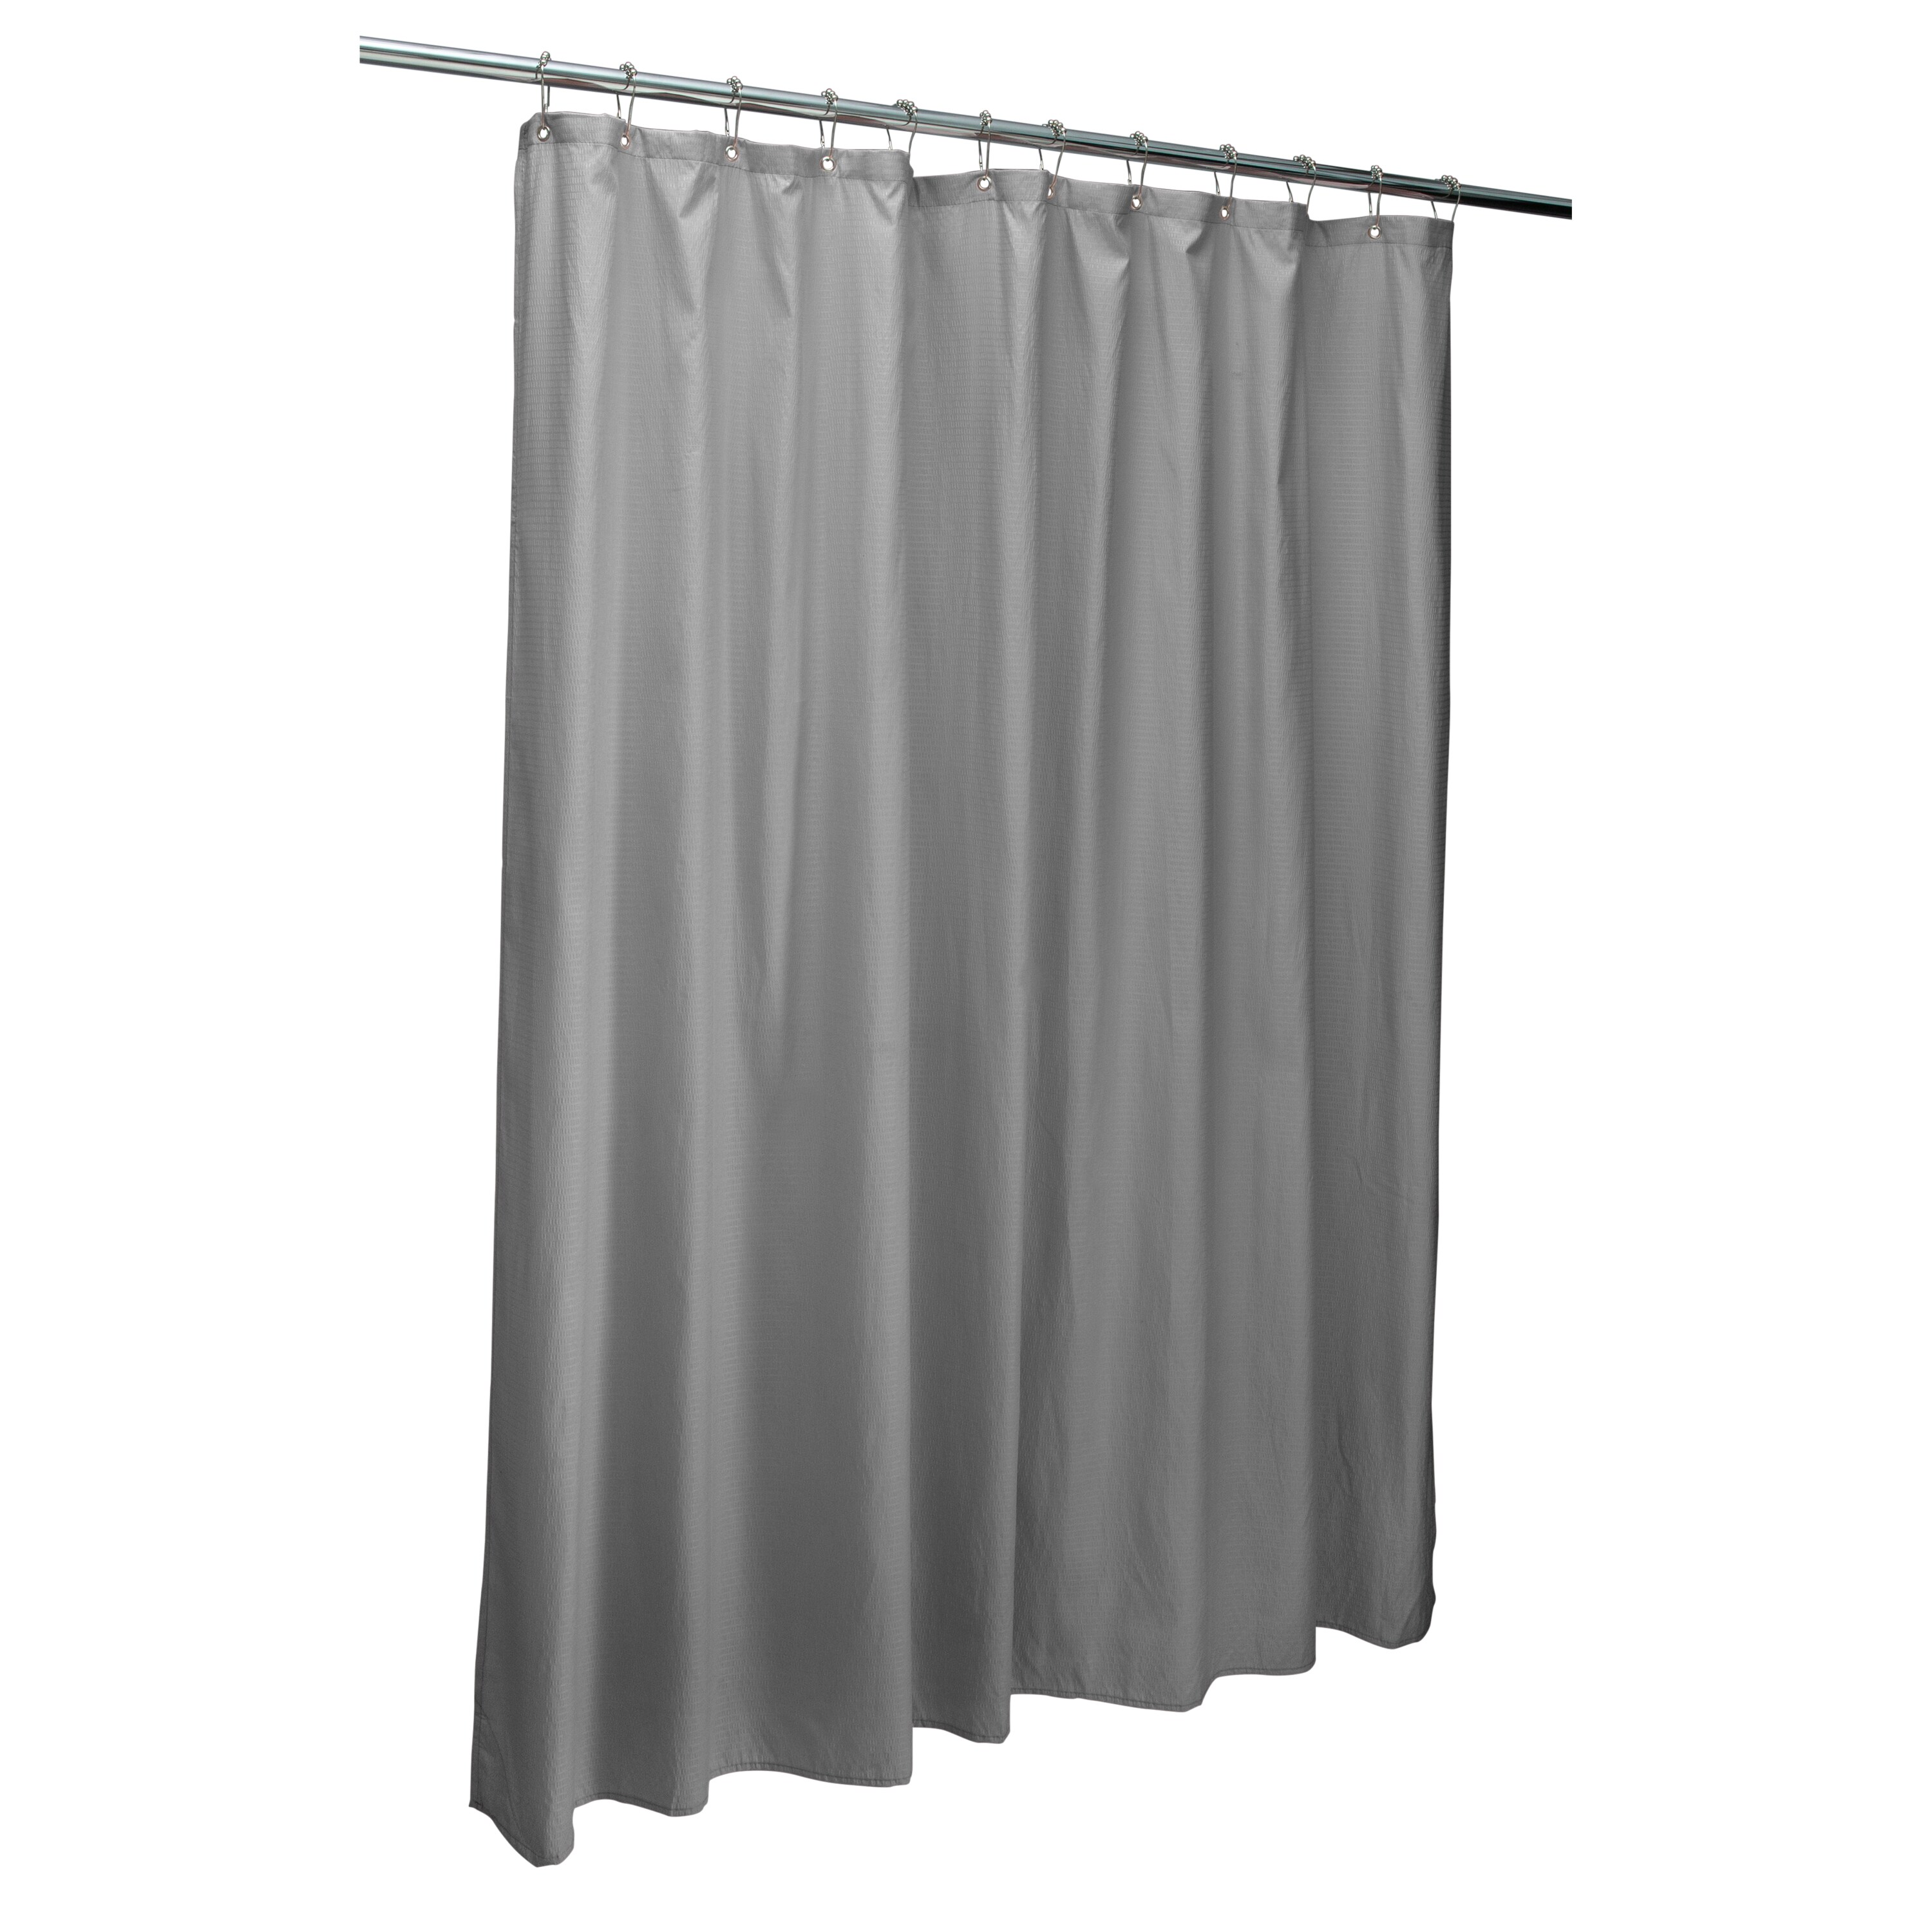 Sfoothome Waterproof Polyester Fabric Shower Curtain,Midew Resistant Washable 